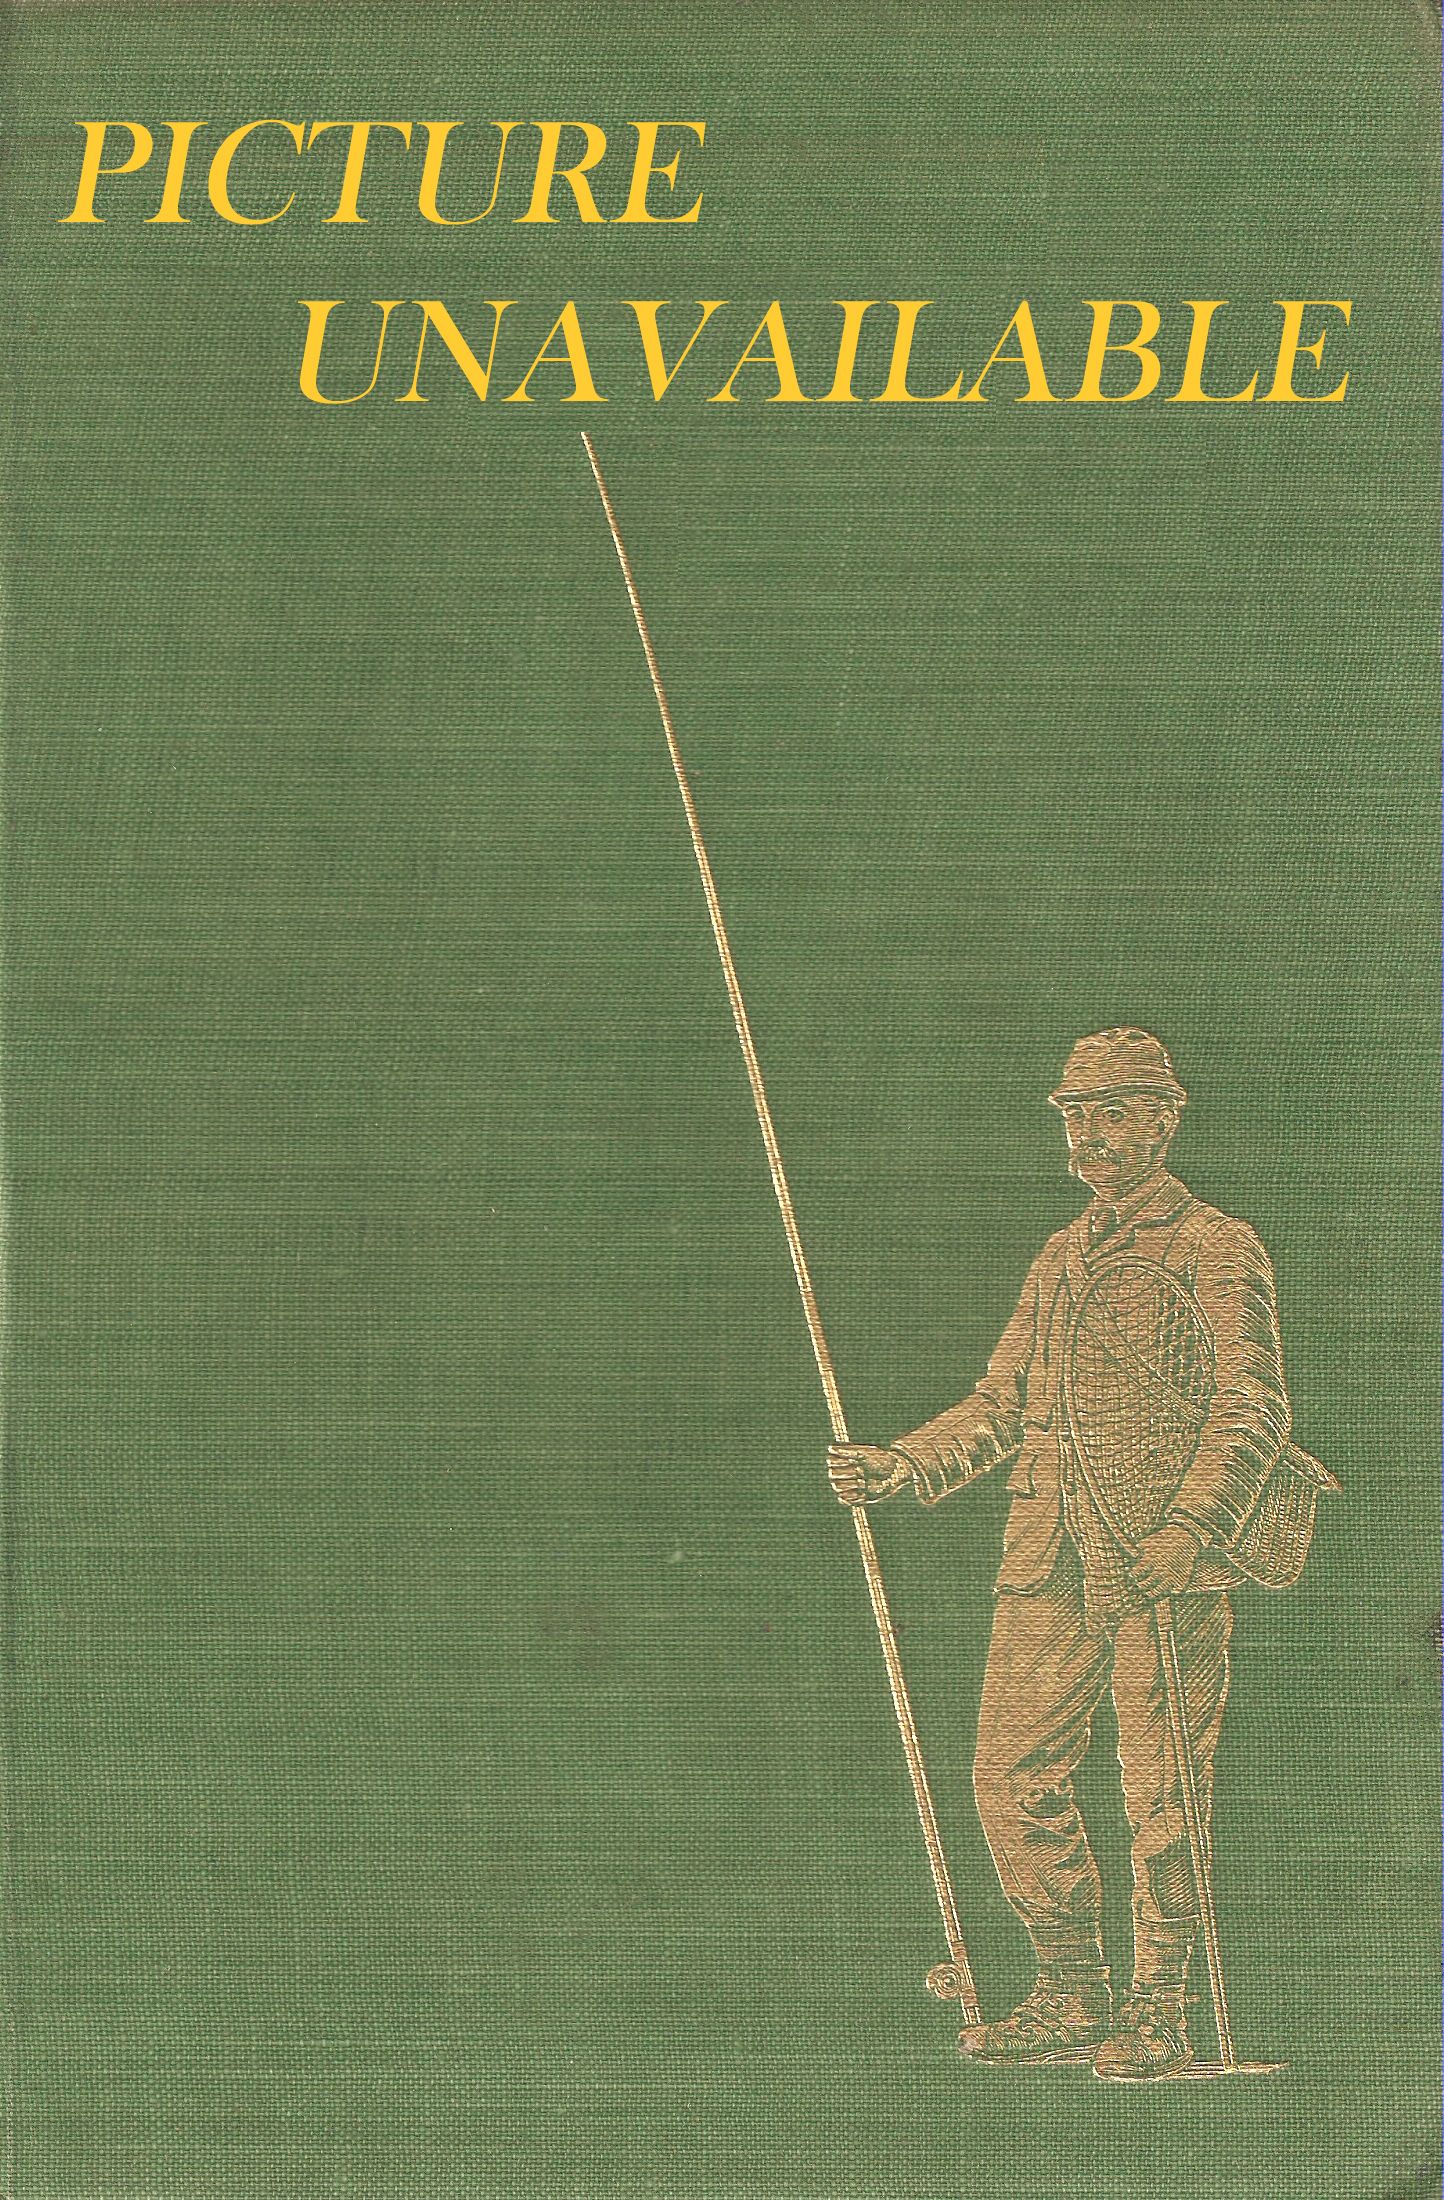 MY LIFE AS AN ANGLER. By William Henderson. Flyfisher's Classic Library  edition.